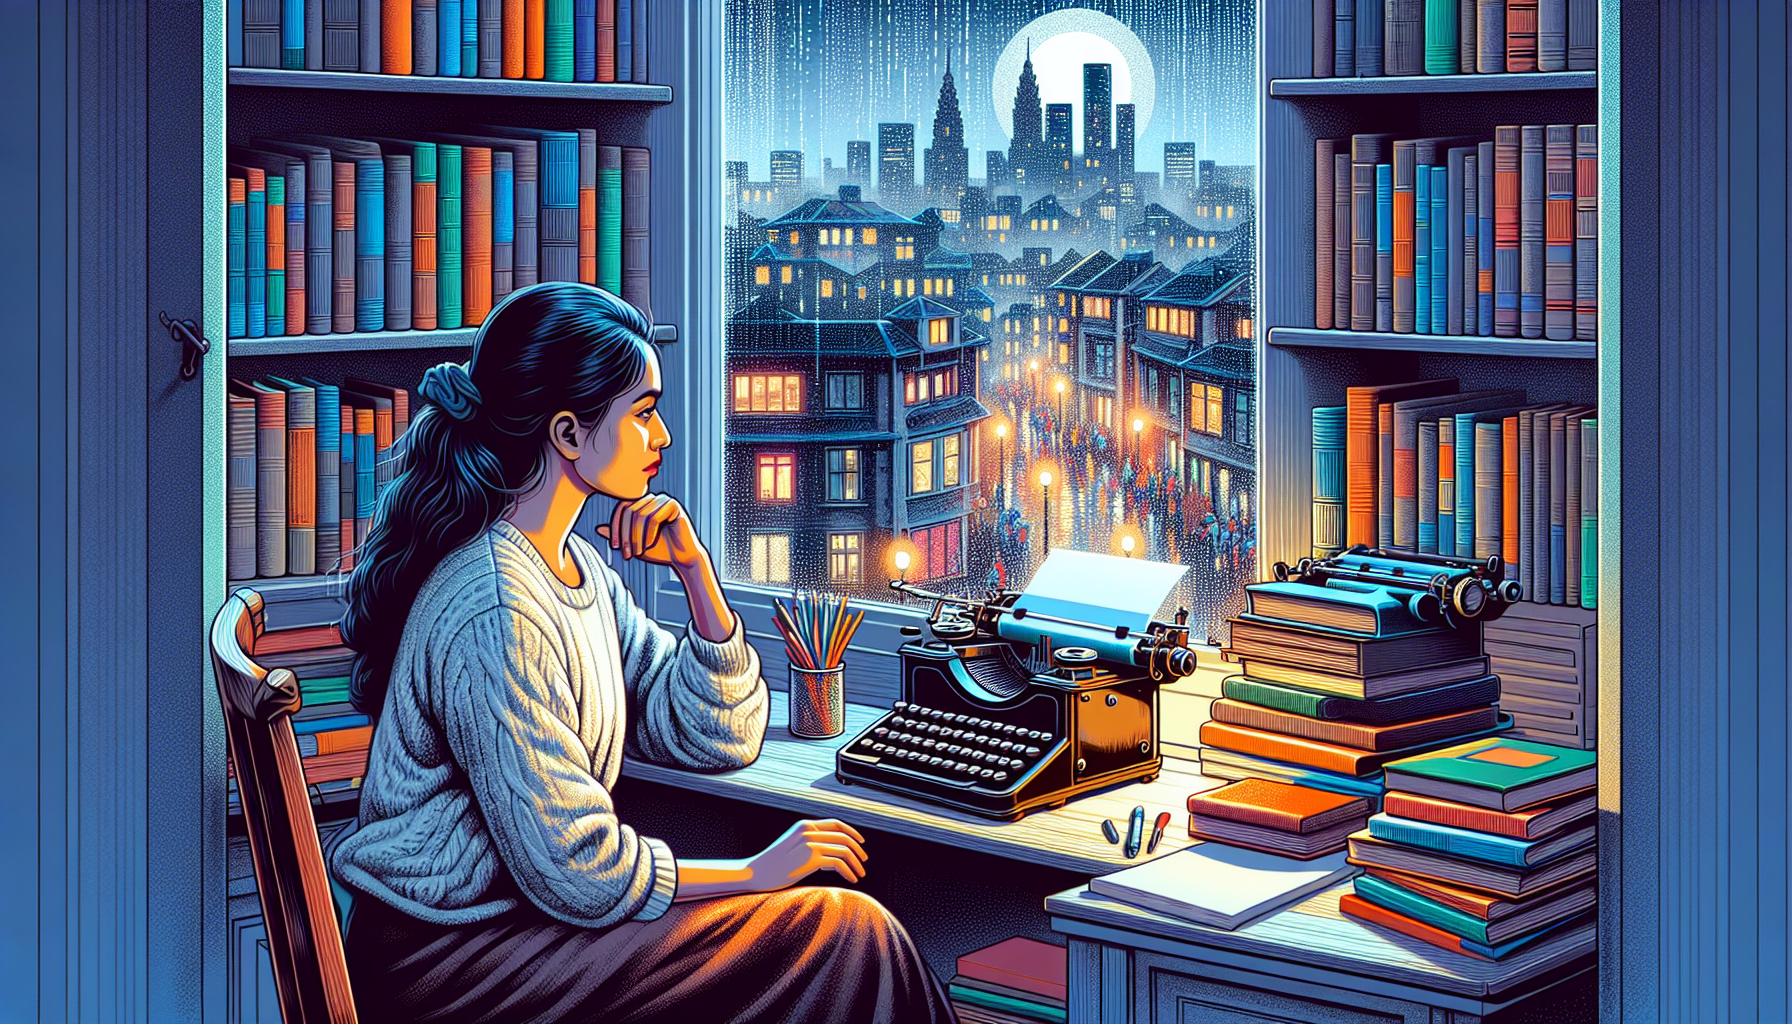 An artist in a cozy, dimly lit study filled with books and vintage typewriters, thoughtfully gazing out a rain-streaked window that overlooks a bustling cityscape at twilight.